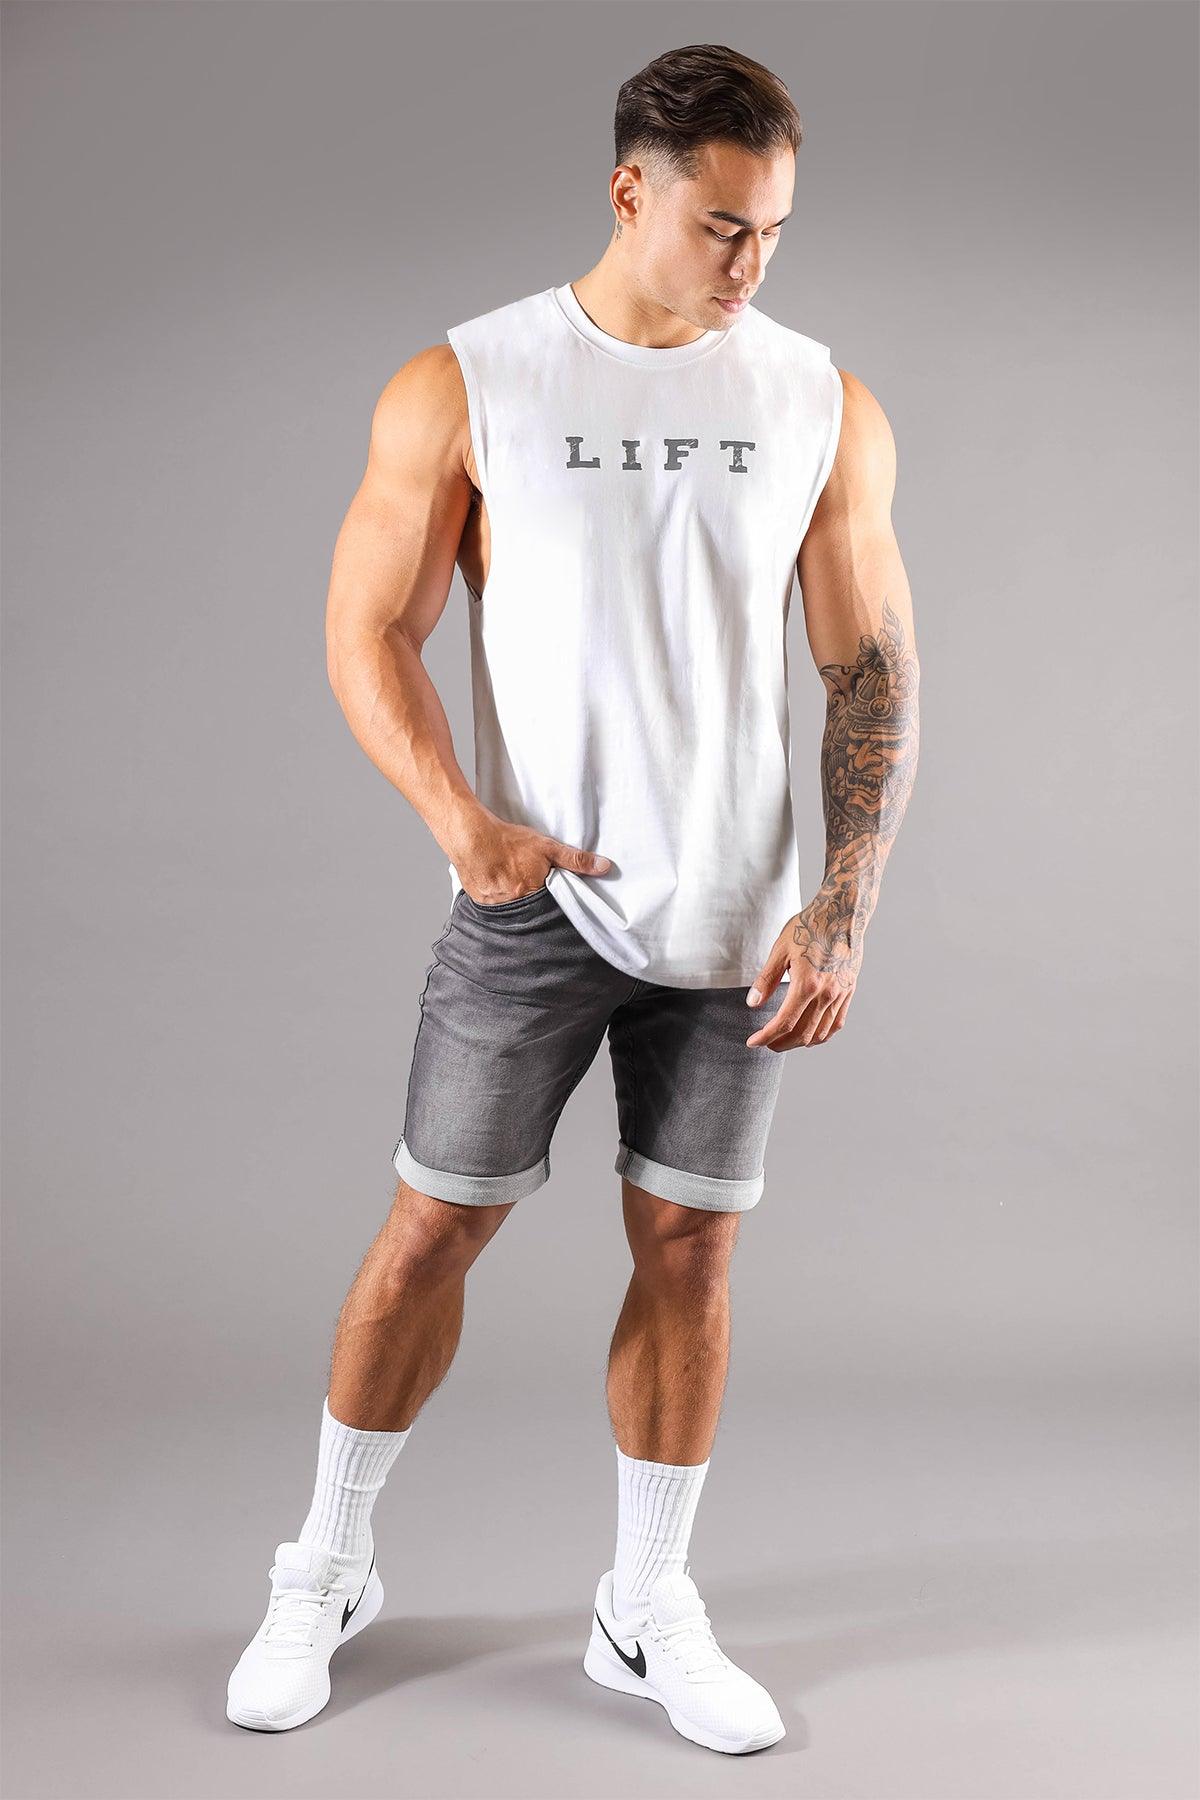 Workout Muscle Tee - Lift - Jed North